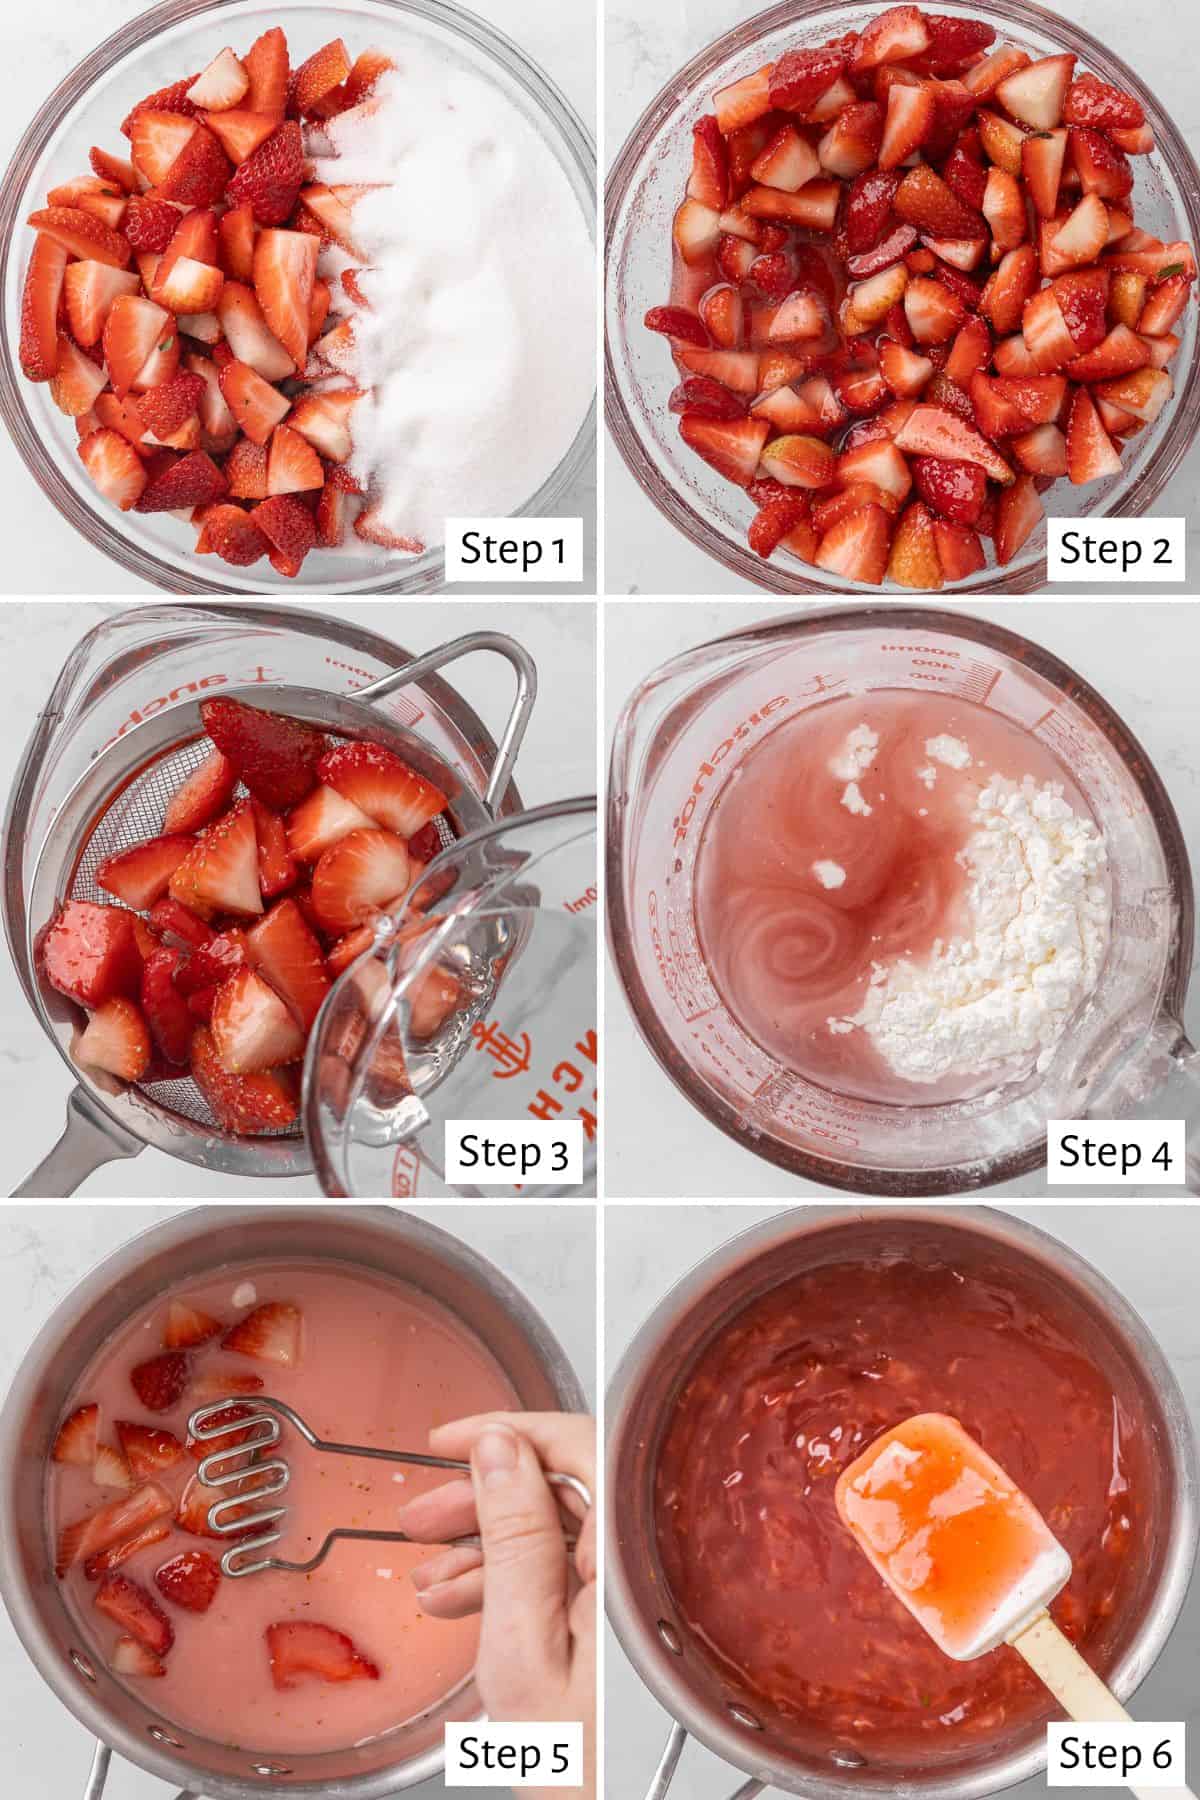 6-image collage of prepping the filling: 1 - Quartered strawberries in a bowl with sugar added; 2 - Strawberries after tossed with sugar and rested; 3 - Strawberries over a sieve with water being poured over; 4 - Strawberry juice in a measuring cup with cornstarch added; 5 - Sauce with cornstarch combined in a pot with ¼ cup quartered strawberries and a potato masher mashing them; 6 - After thickening with a rubber spatula.